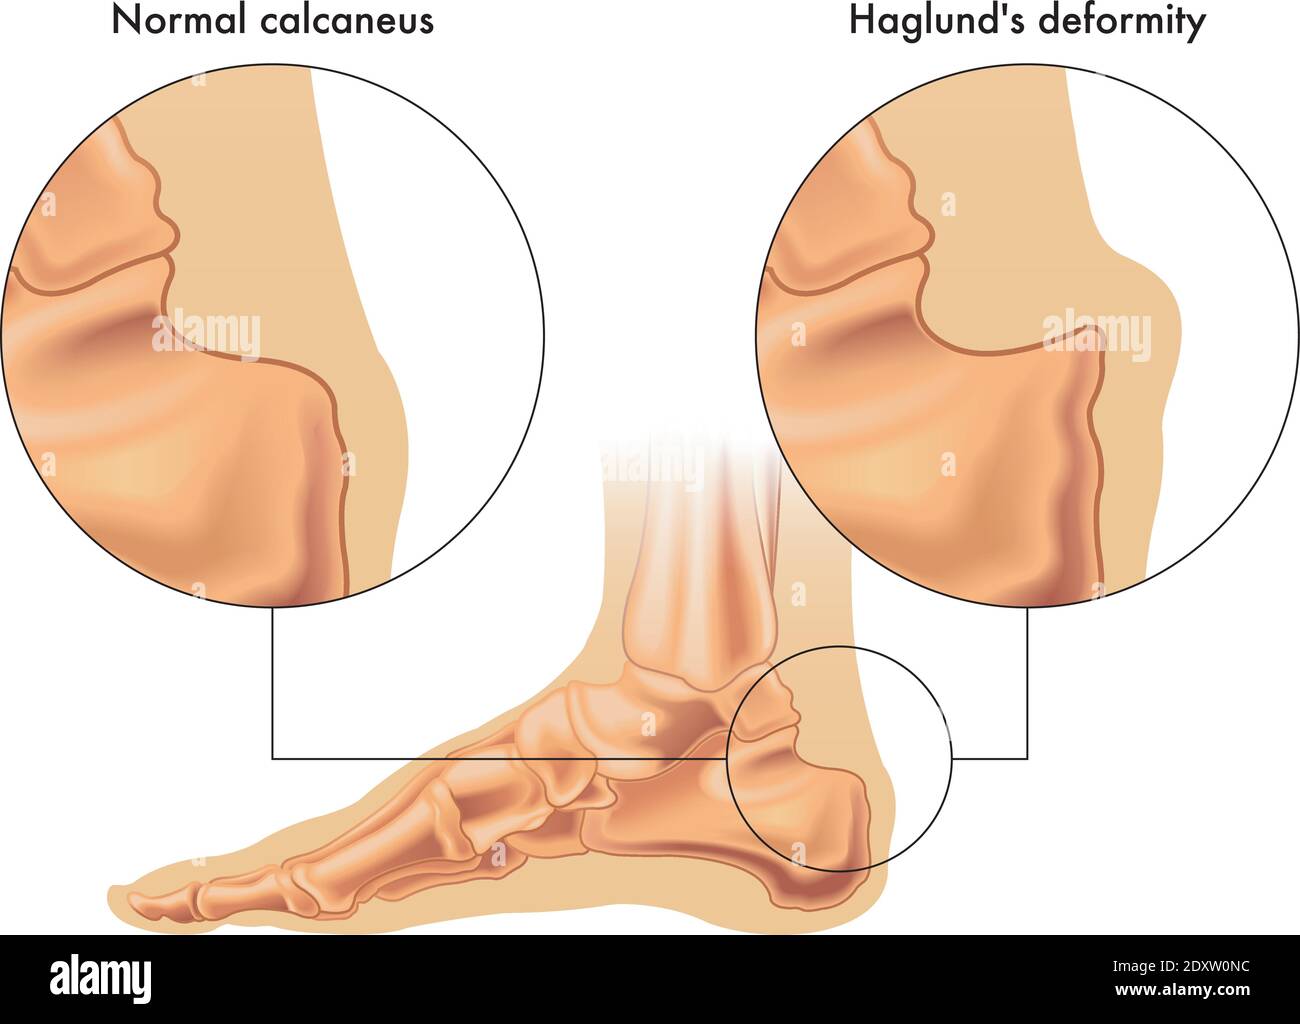 Medical illustration shows the comparison between a normal calcaneus and one affected by Haglund's deformity, with annotations. Stock Vector